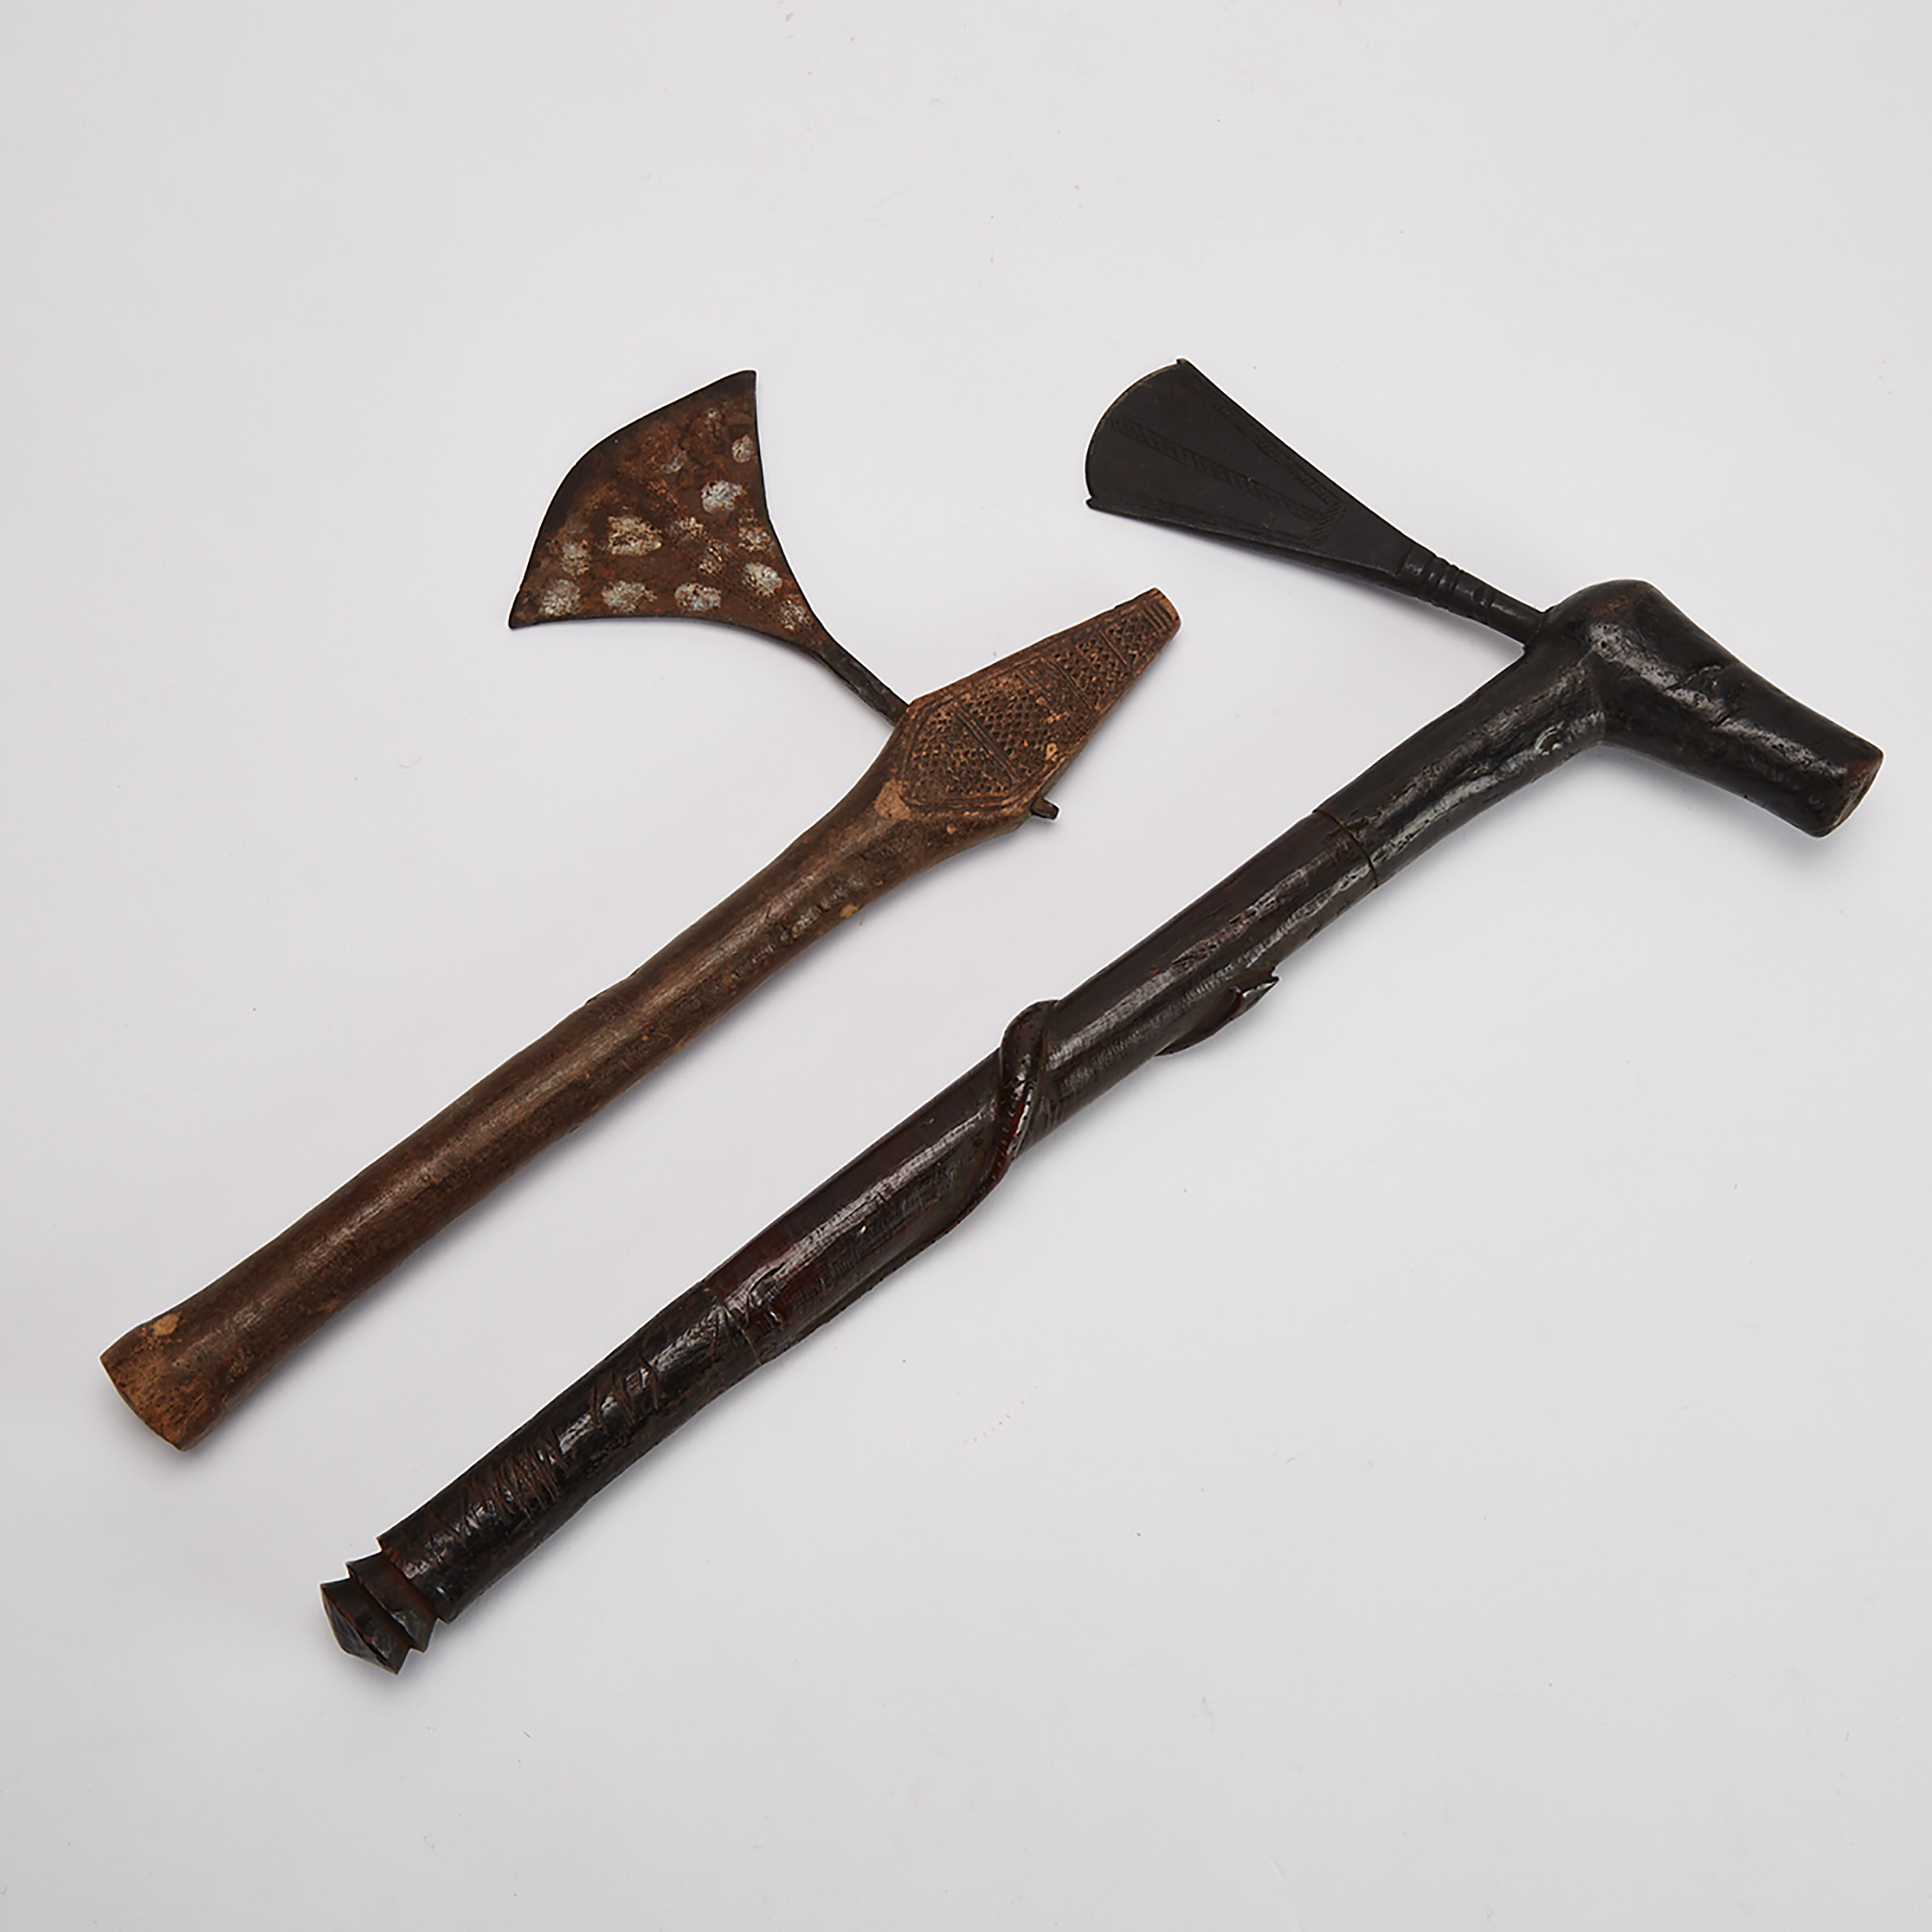 Chokwe Axe, Central Africa together with a unidentified axe, Africa